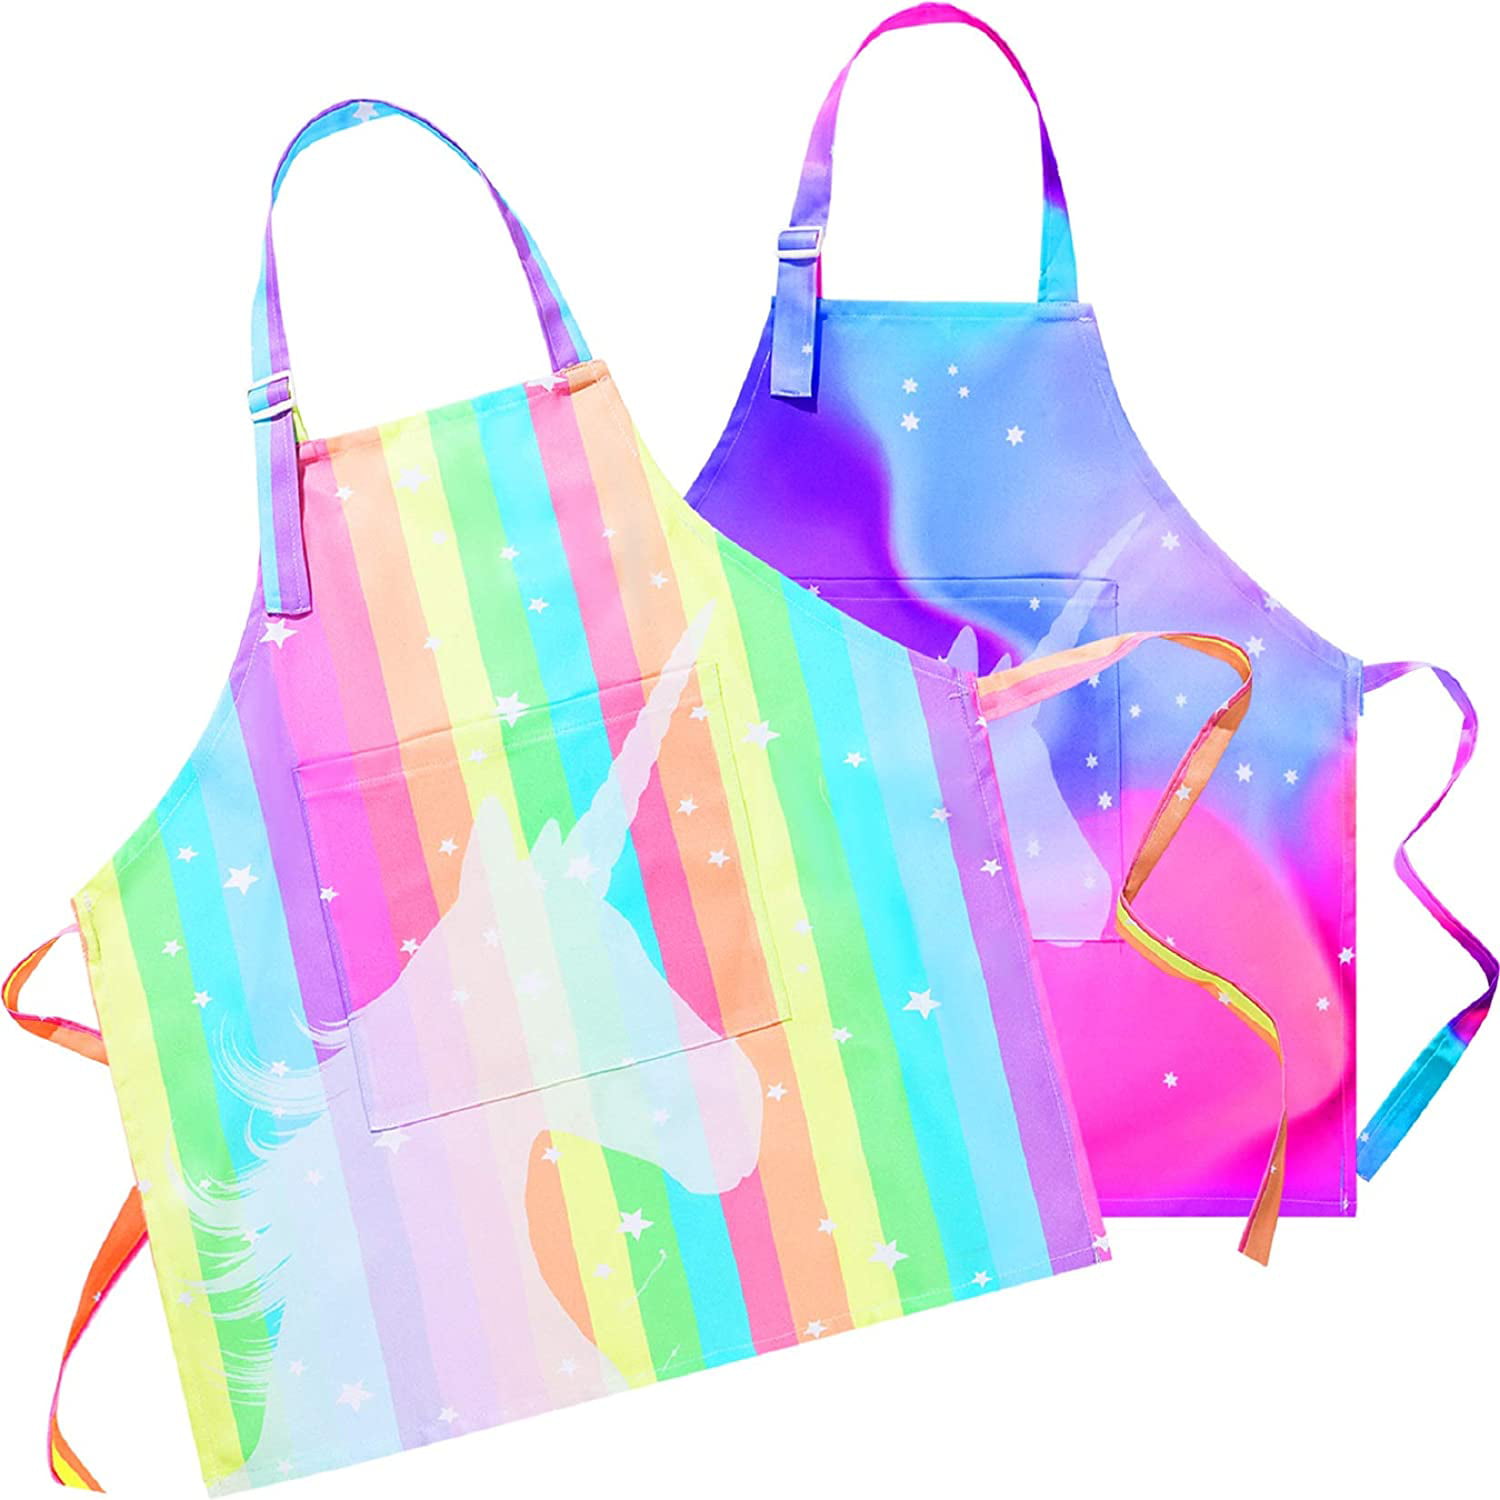 2 Pack Kids Apron Unicorn Mermaid Aprons with Pockets for Children Girls Boys Kitchen Chef Aprons for Cooking Baking Painting 